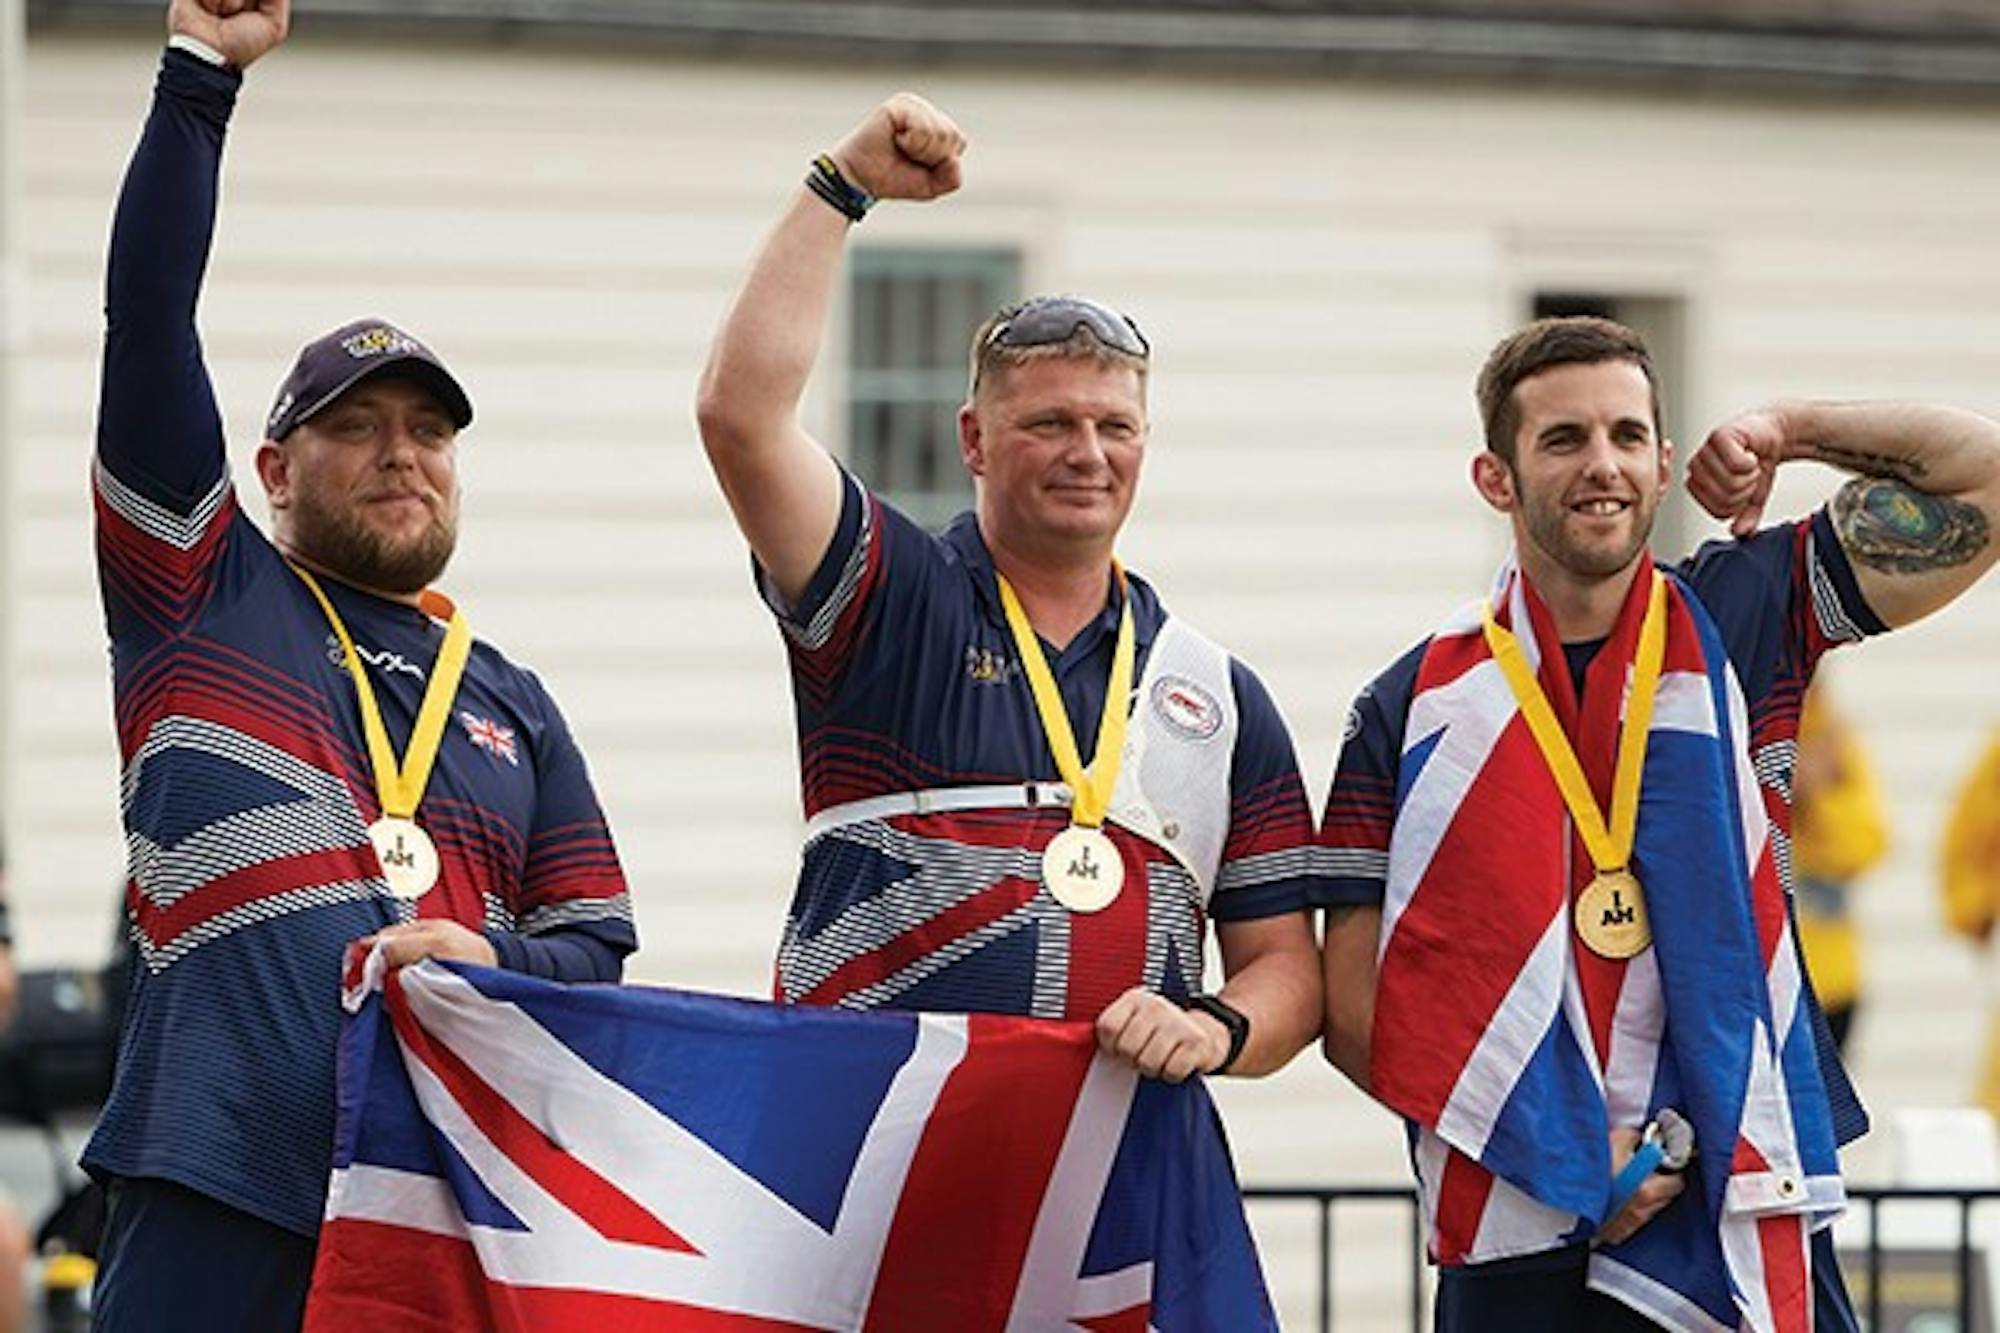 Walpole member exclusive: Attend the Fundraising Gala for the Invictus Games UK Delegation  